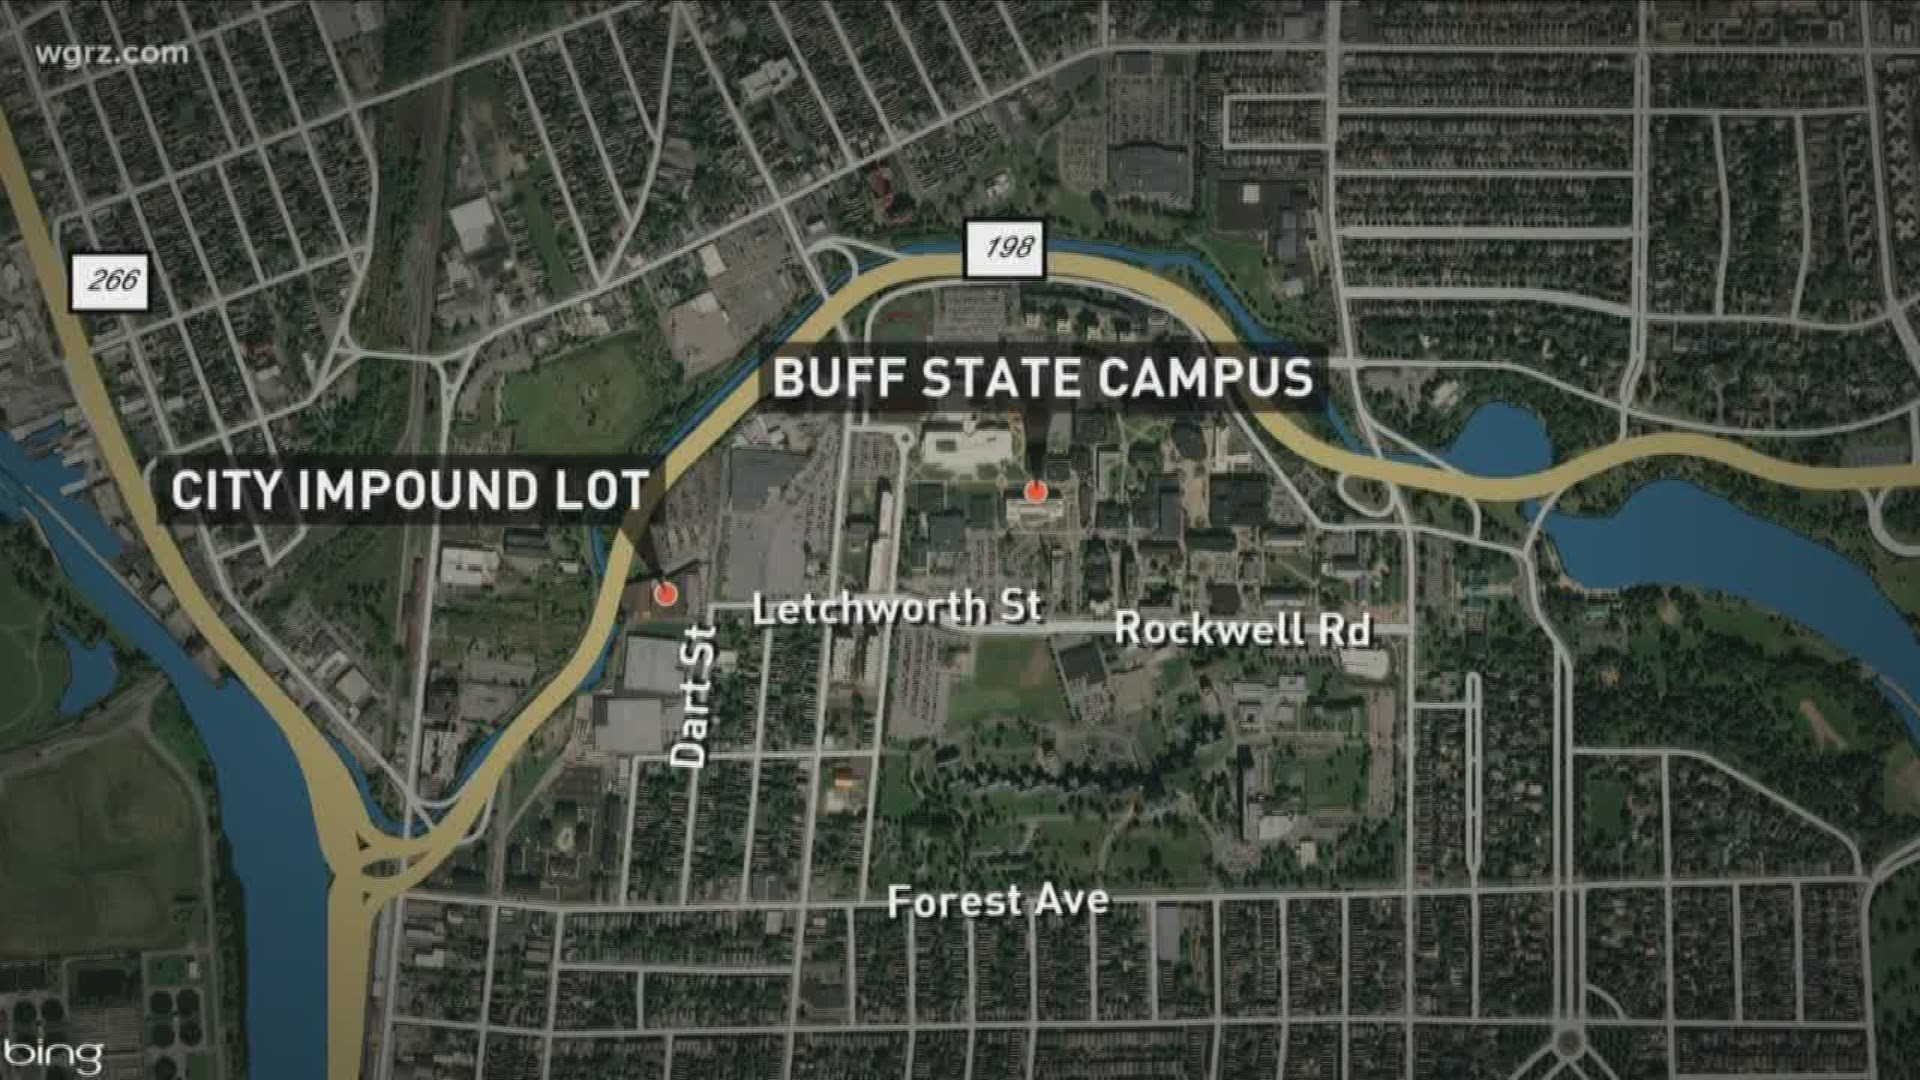 SUNY Buffalo State to expand campus